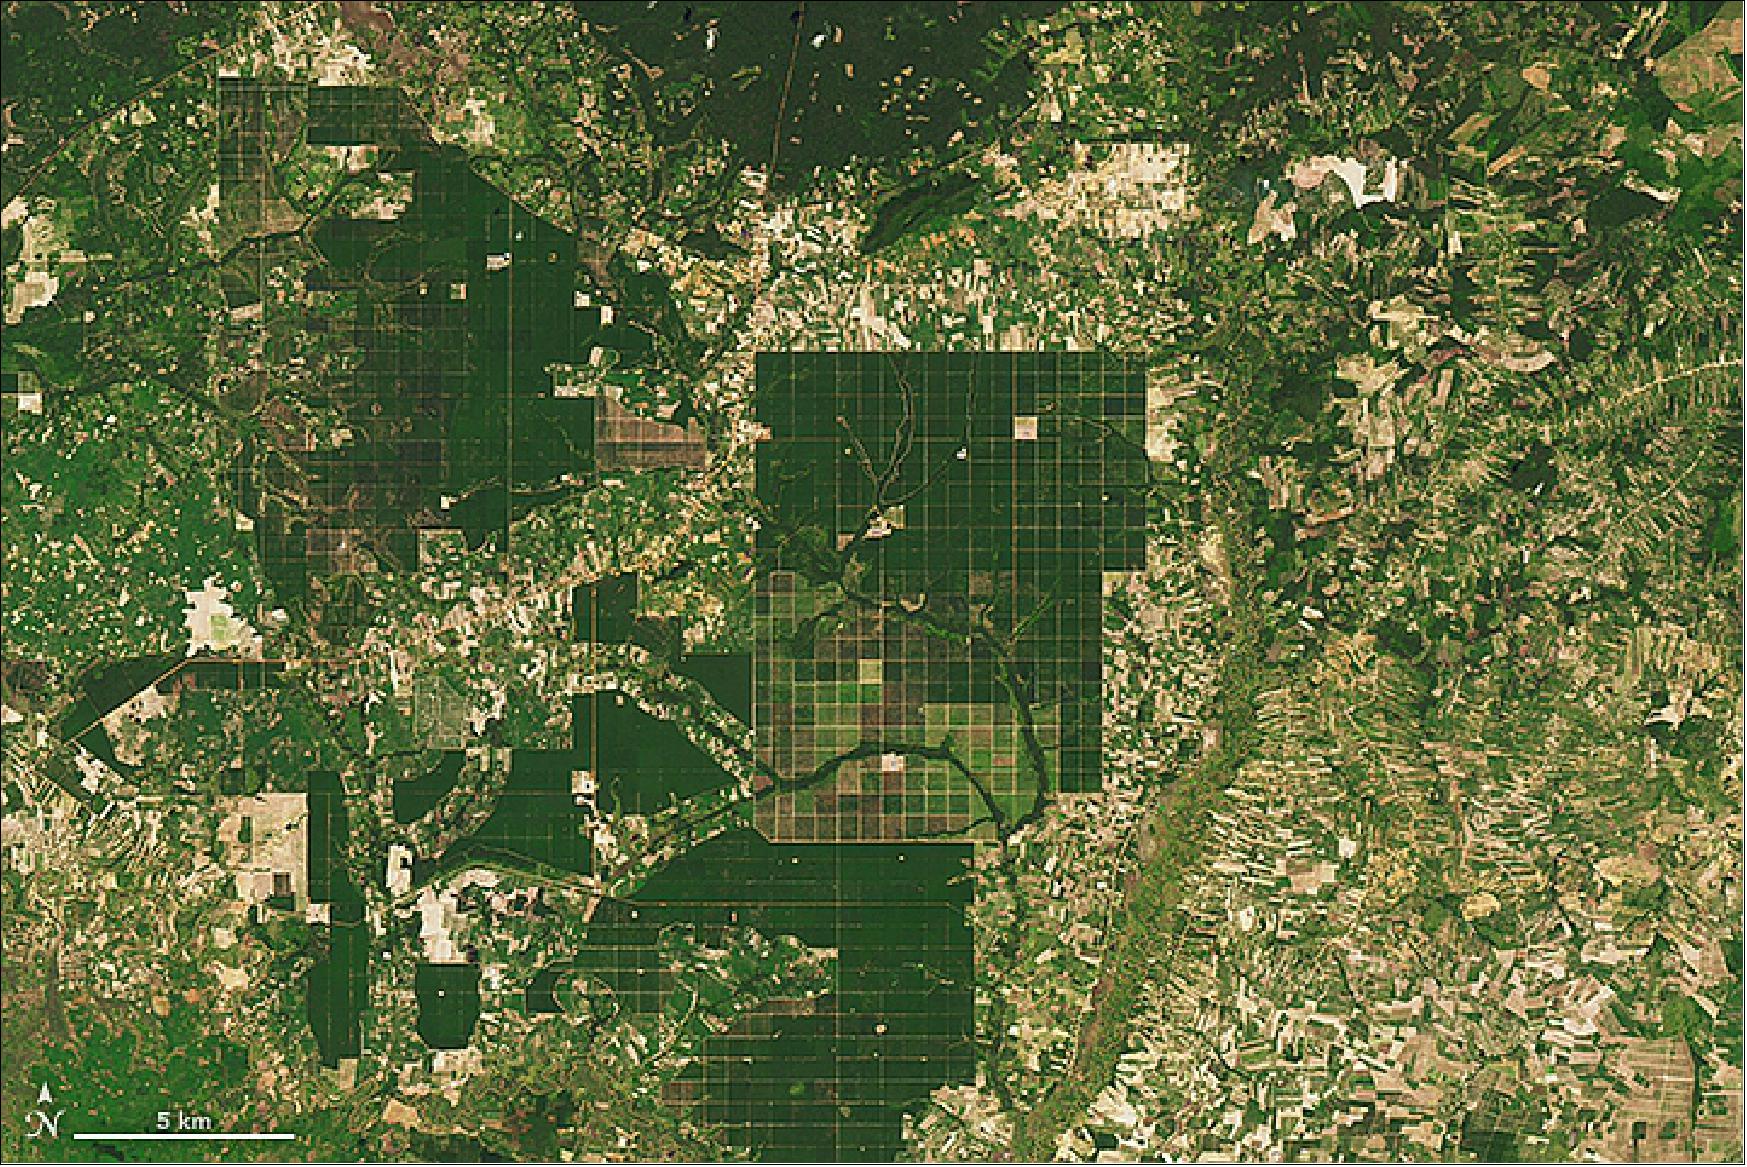 Figure 36: Landsat-8 OLI image of the same region in Cambodia, acquired on October 30, 2015 (image credit: NASA Earth Observatory, image by Joshua Stevens, using Landsat data from the USGS)